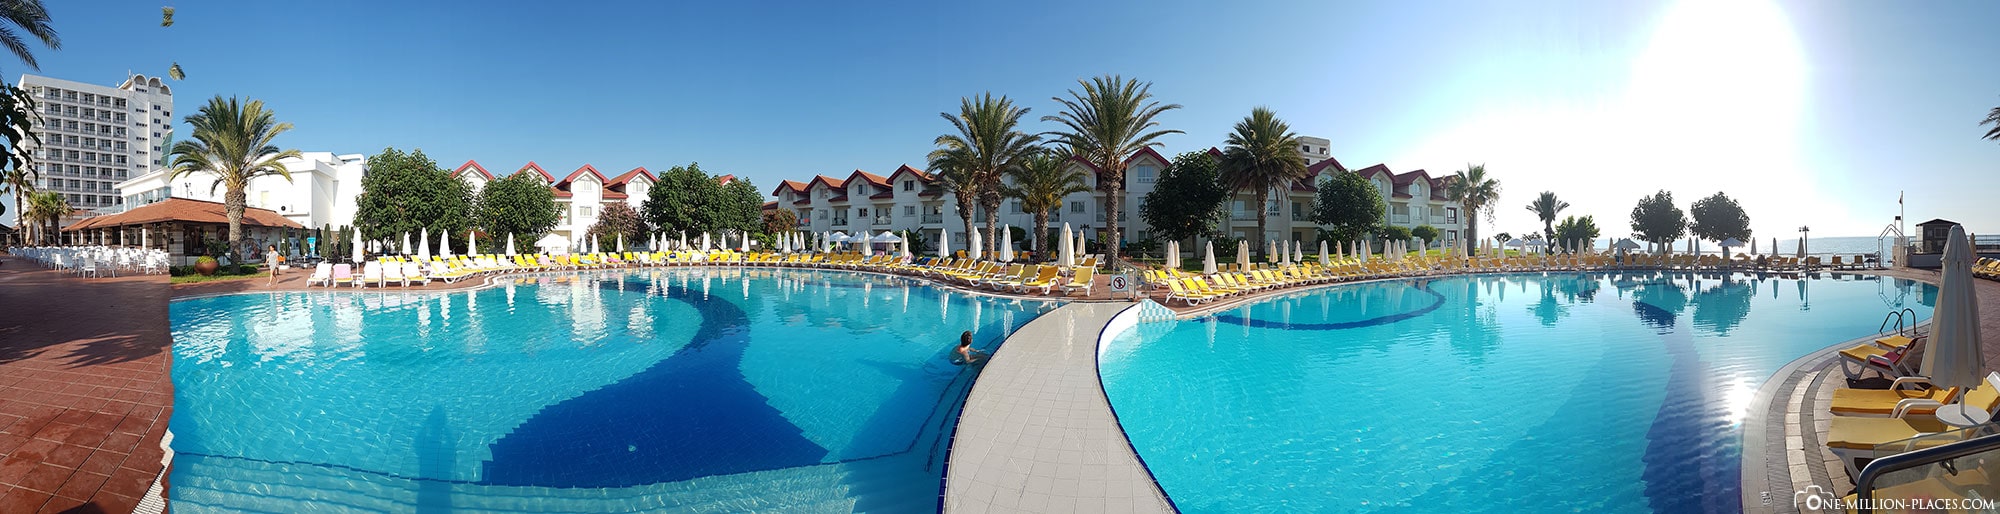 Pool, Salamis Bay Conti Resort, Famagusta, Cyprus, Northern Cyprus, Experiences, Travel Report